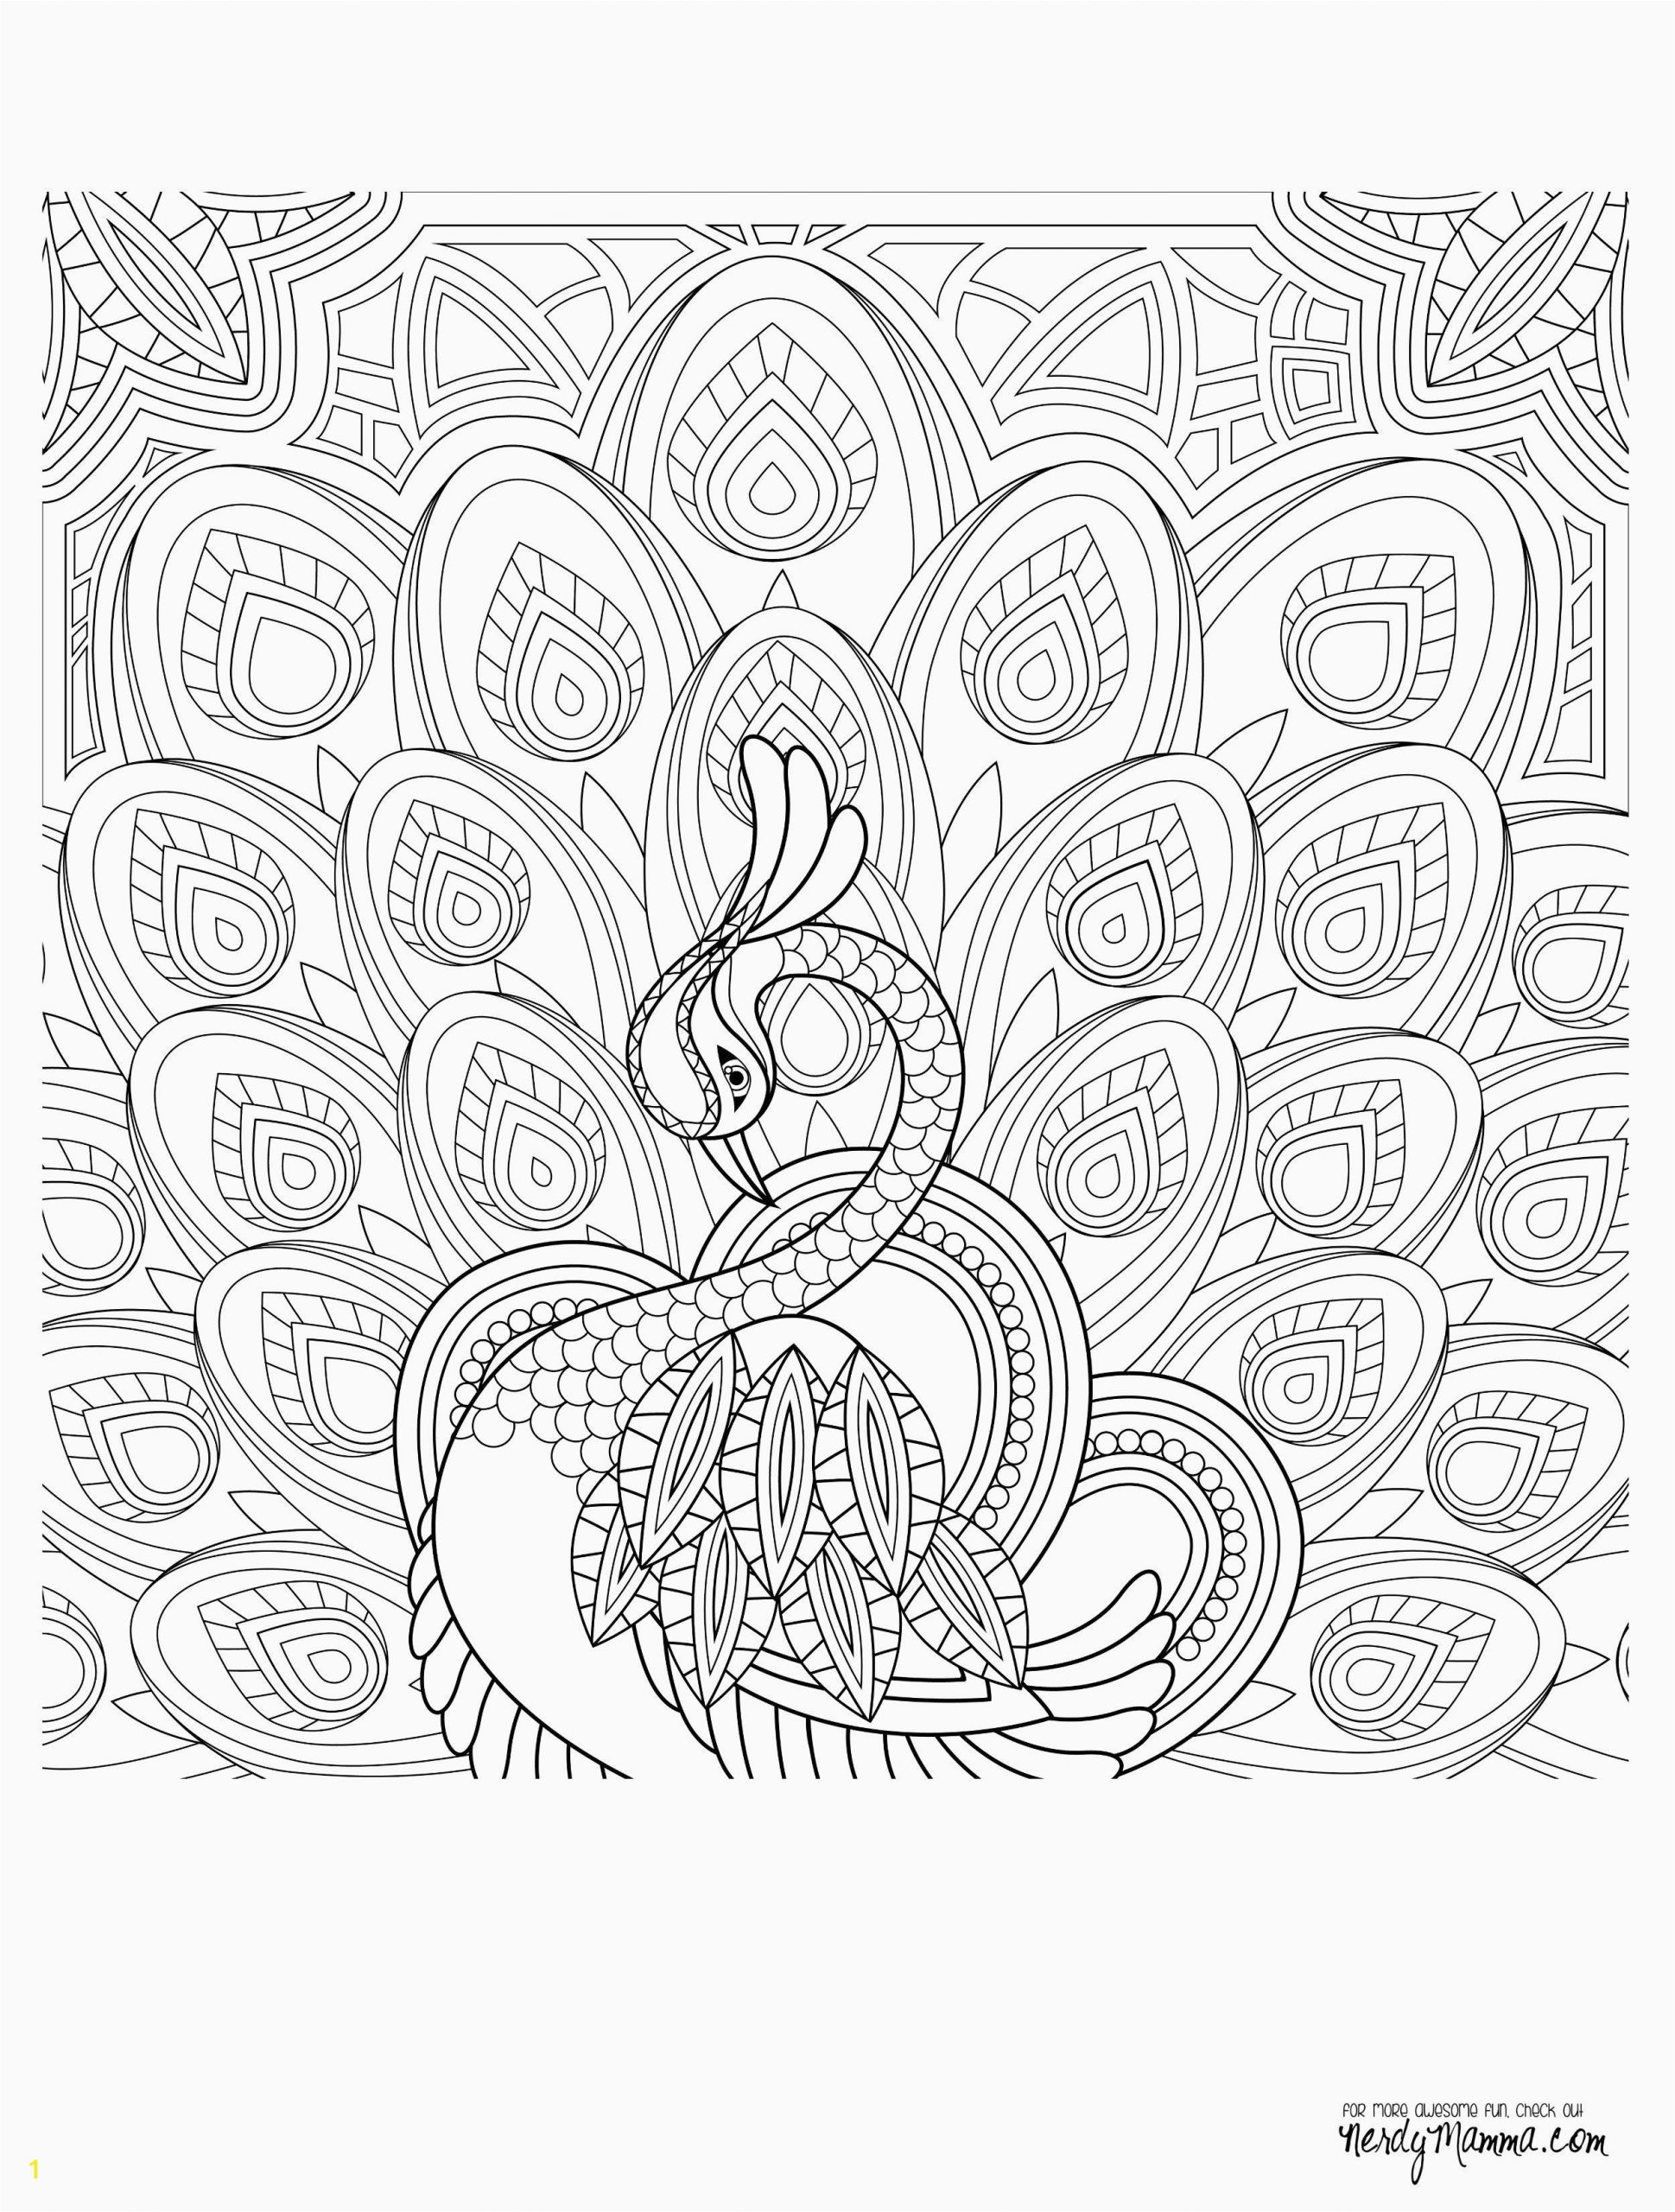 Coloring Pages Printable Free for Adults Pin On Coloring Book